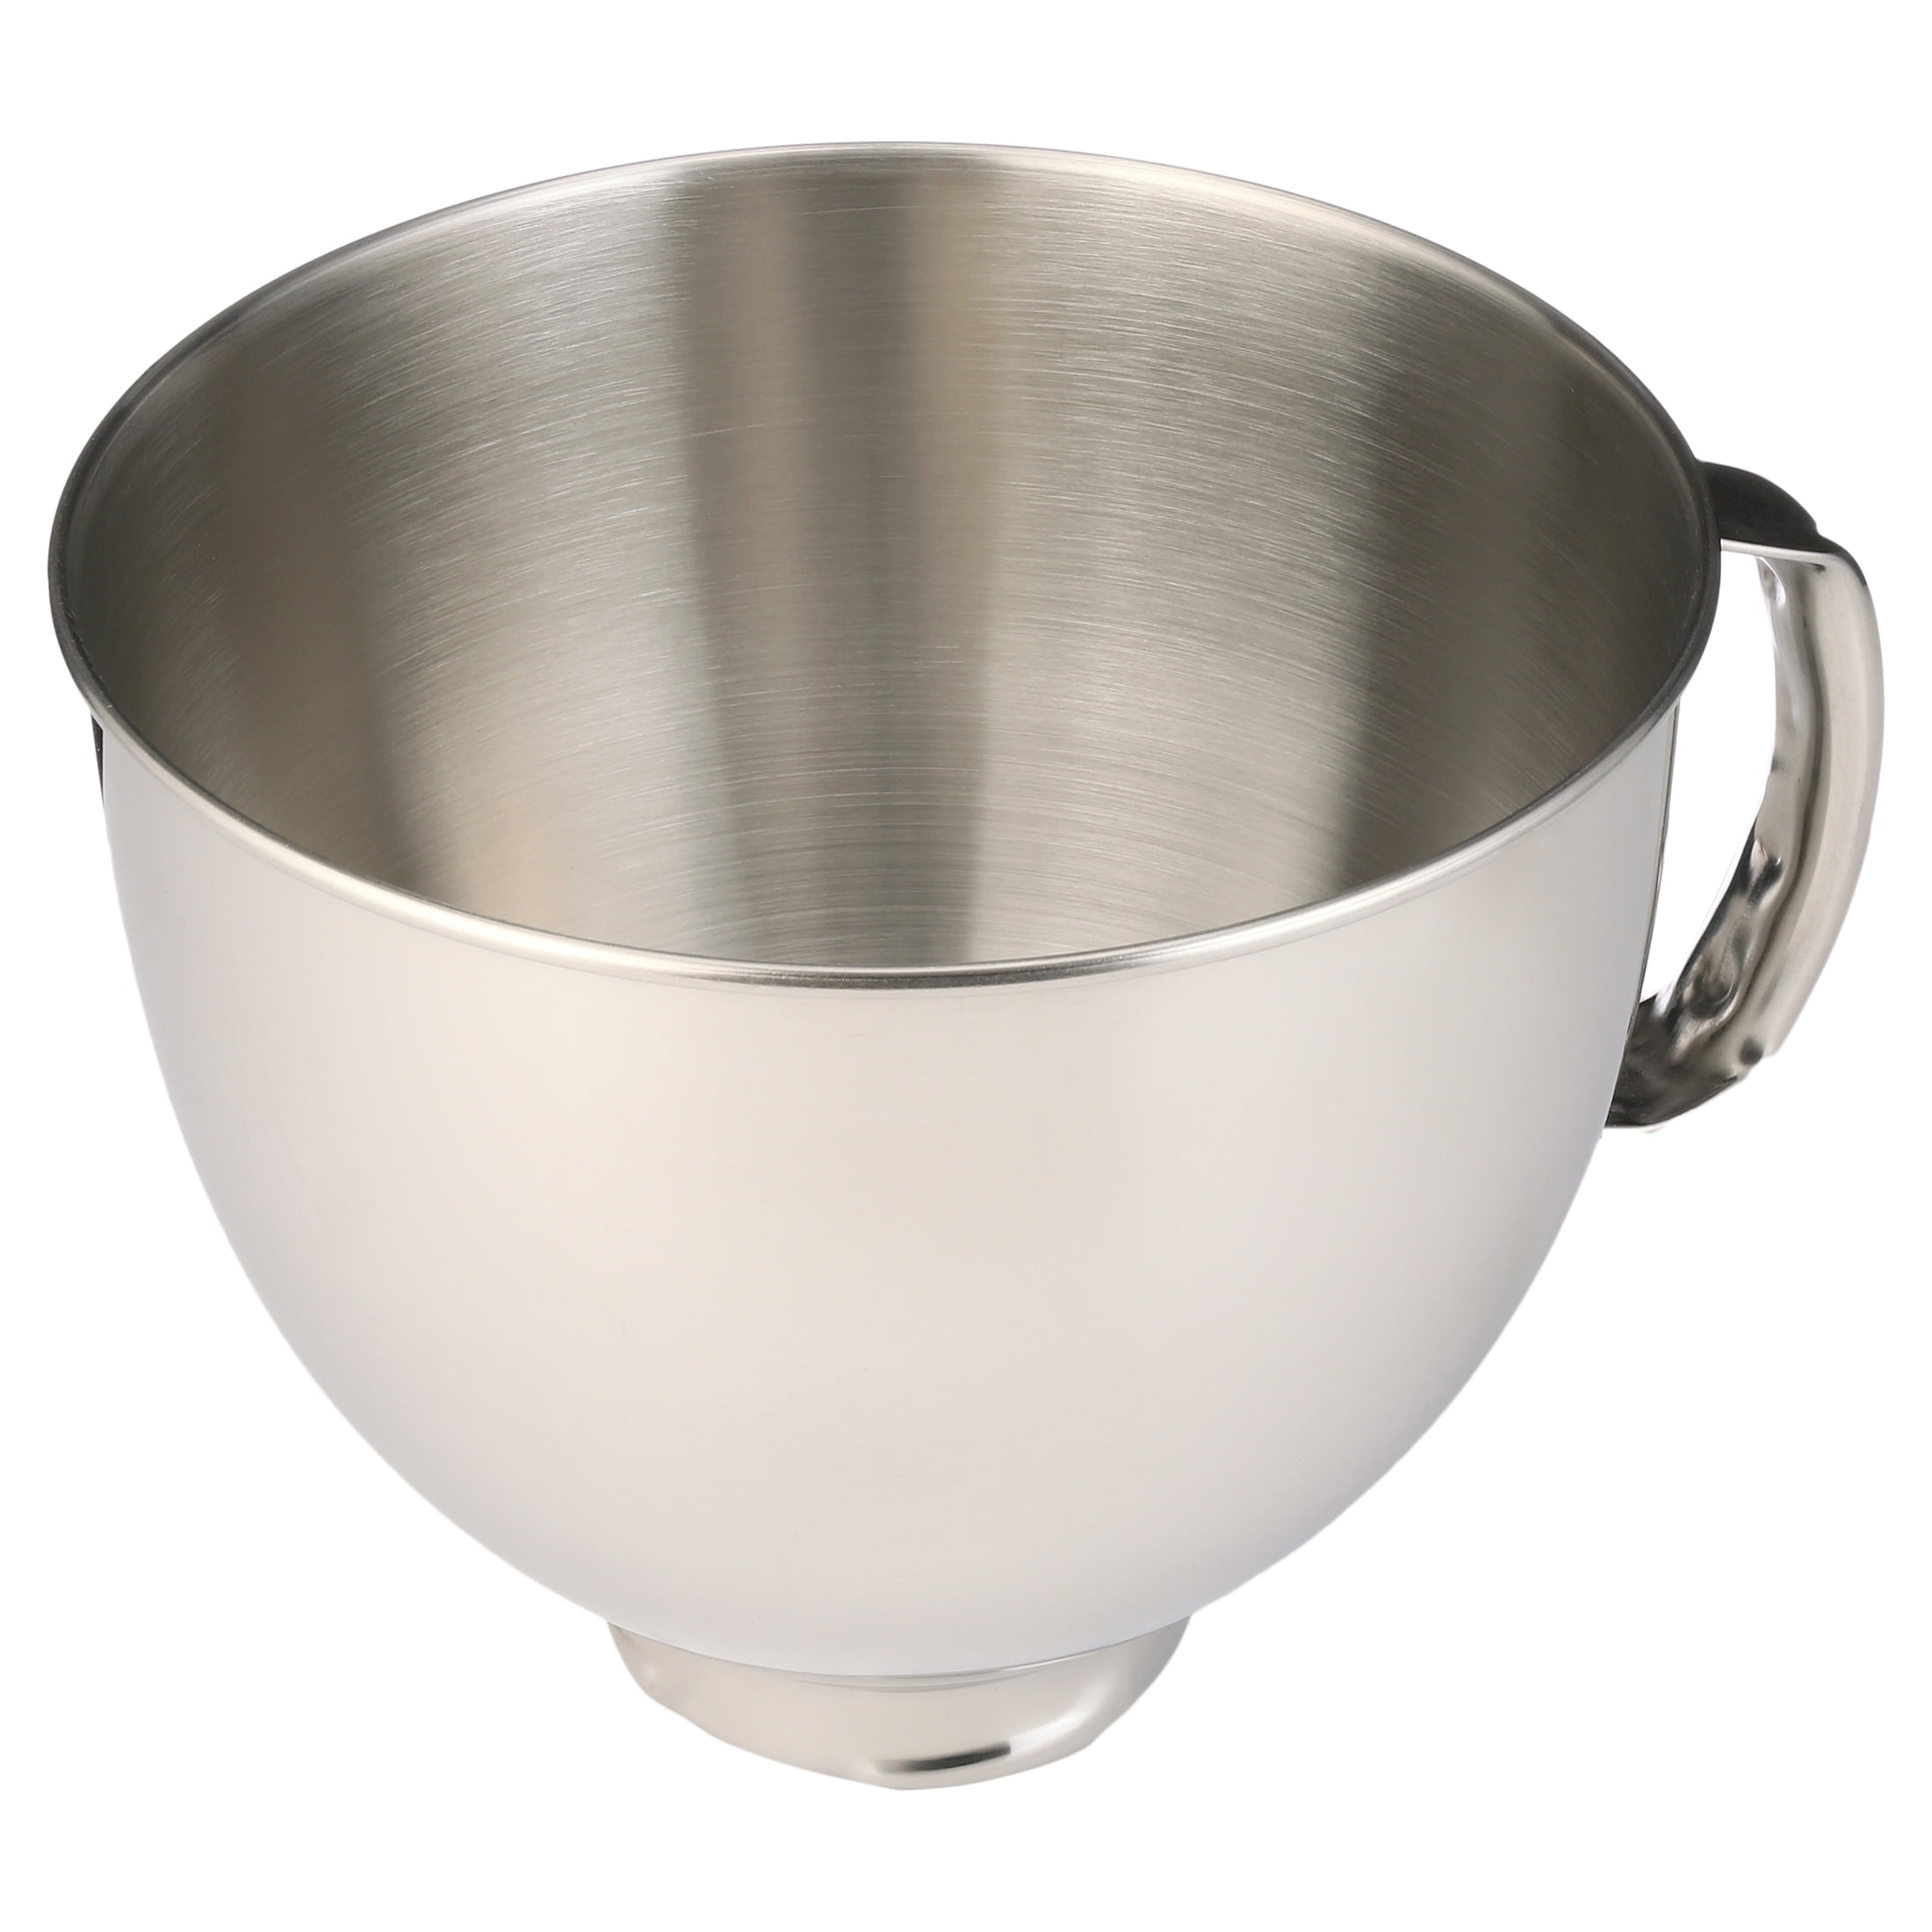 KitchenAid KN25WPBH Polished Stainless Steel 5 Qt. Mixing Bowl